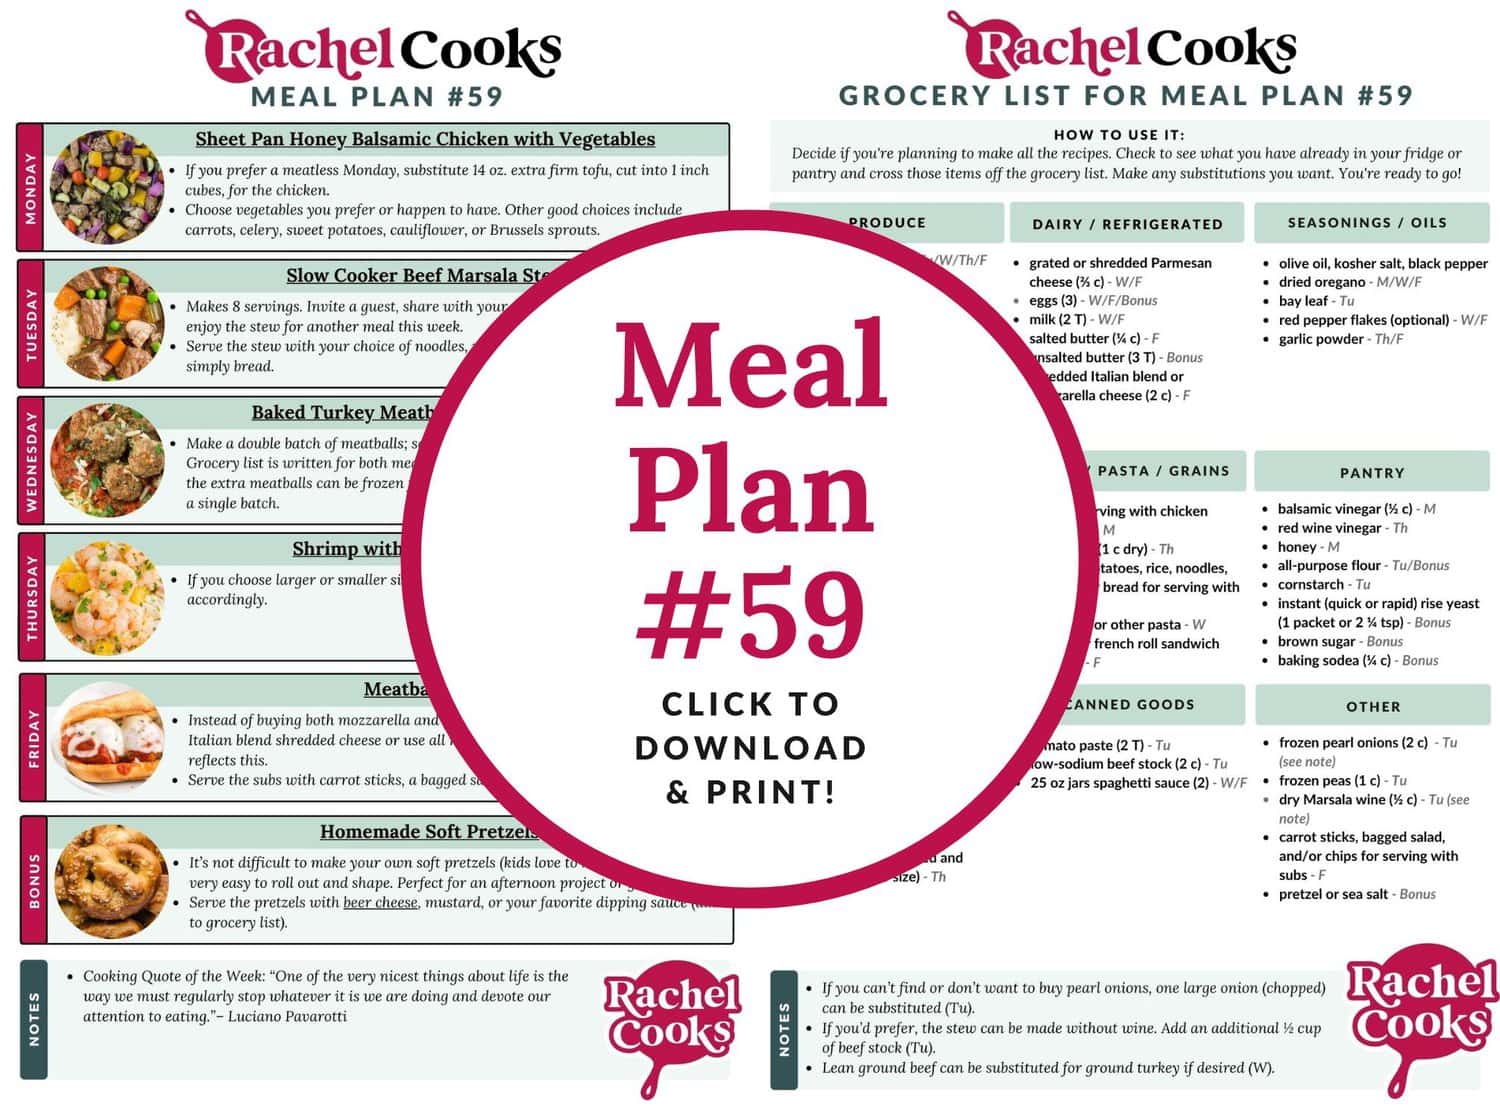 Meal plan 59 preview image showing both pages.